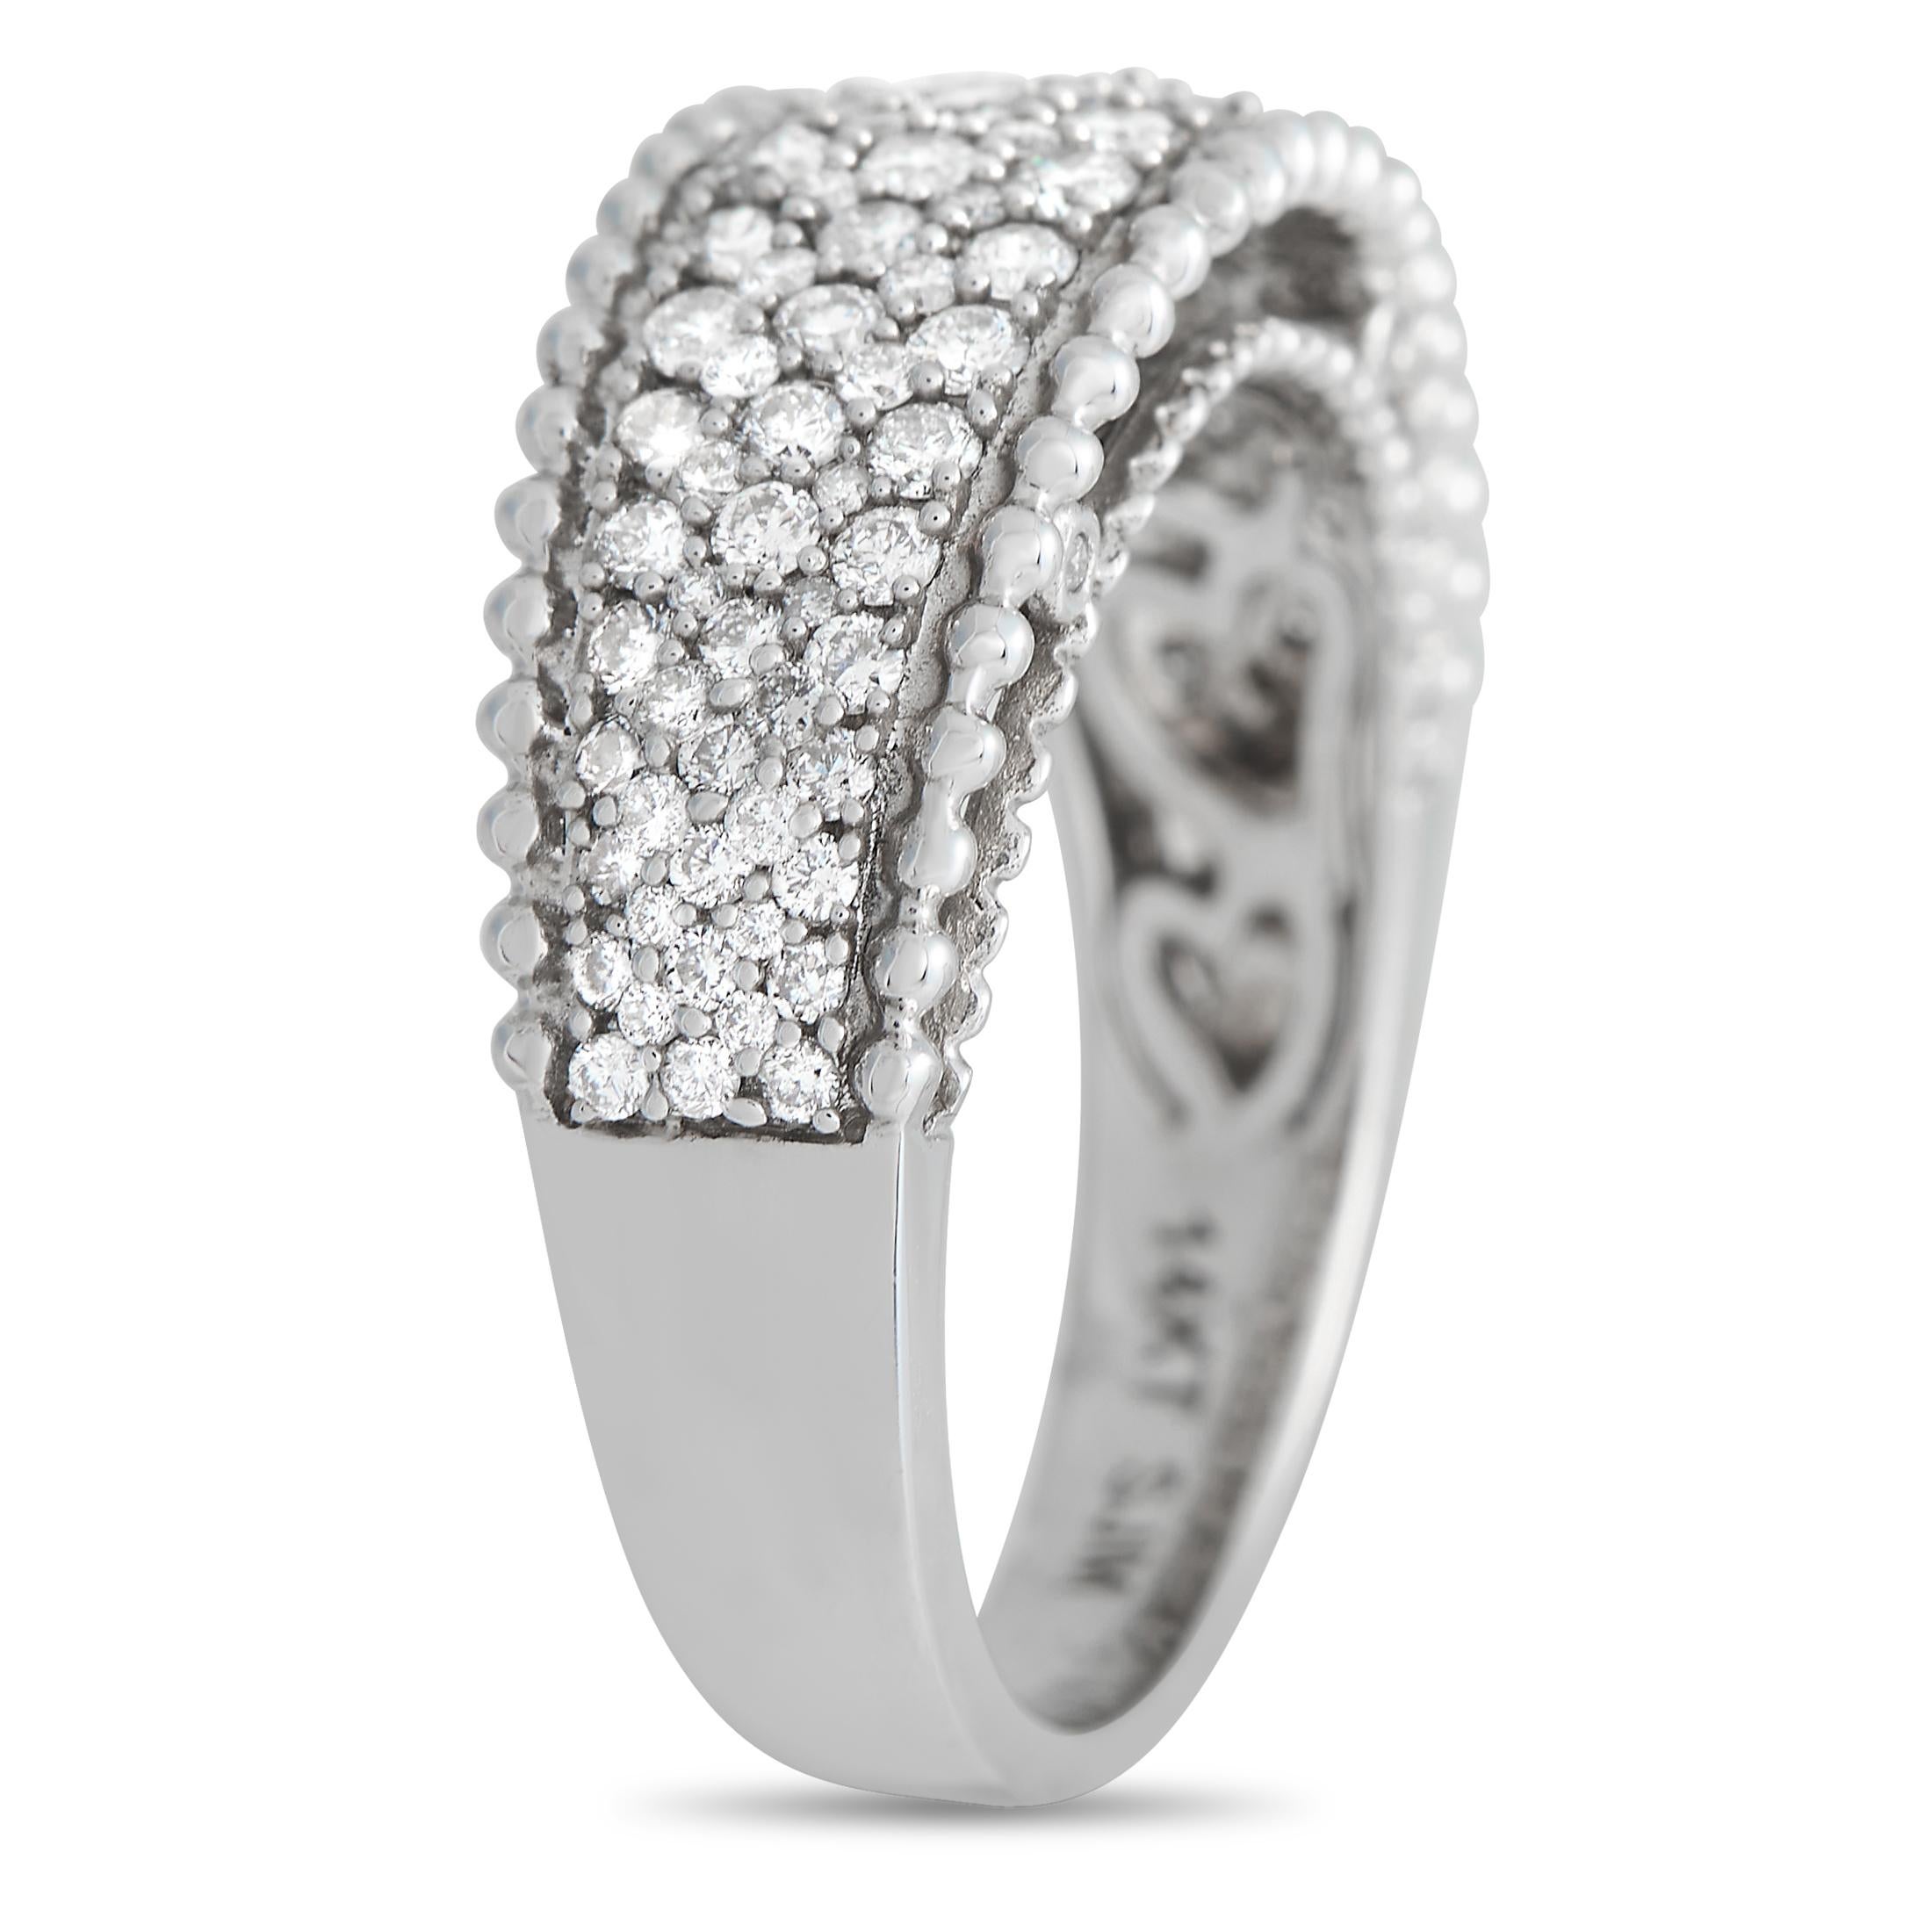 Sparkling Diamonds with a total weight of 1.0 carats are elevated by millegrain detailing on this sleek, sophisticated ring. Crafted from 14K White Gold, a 3mm wide band and a 5mm top height makes it ideal for everyday wear.This jewelry piece is